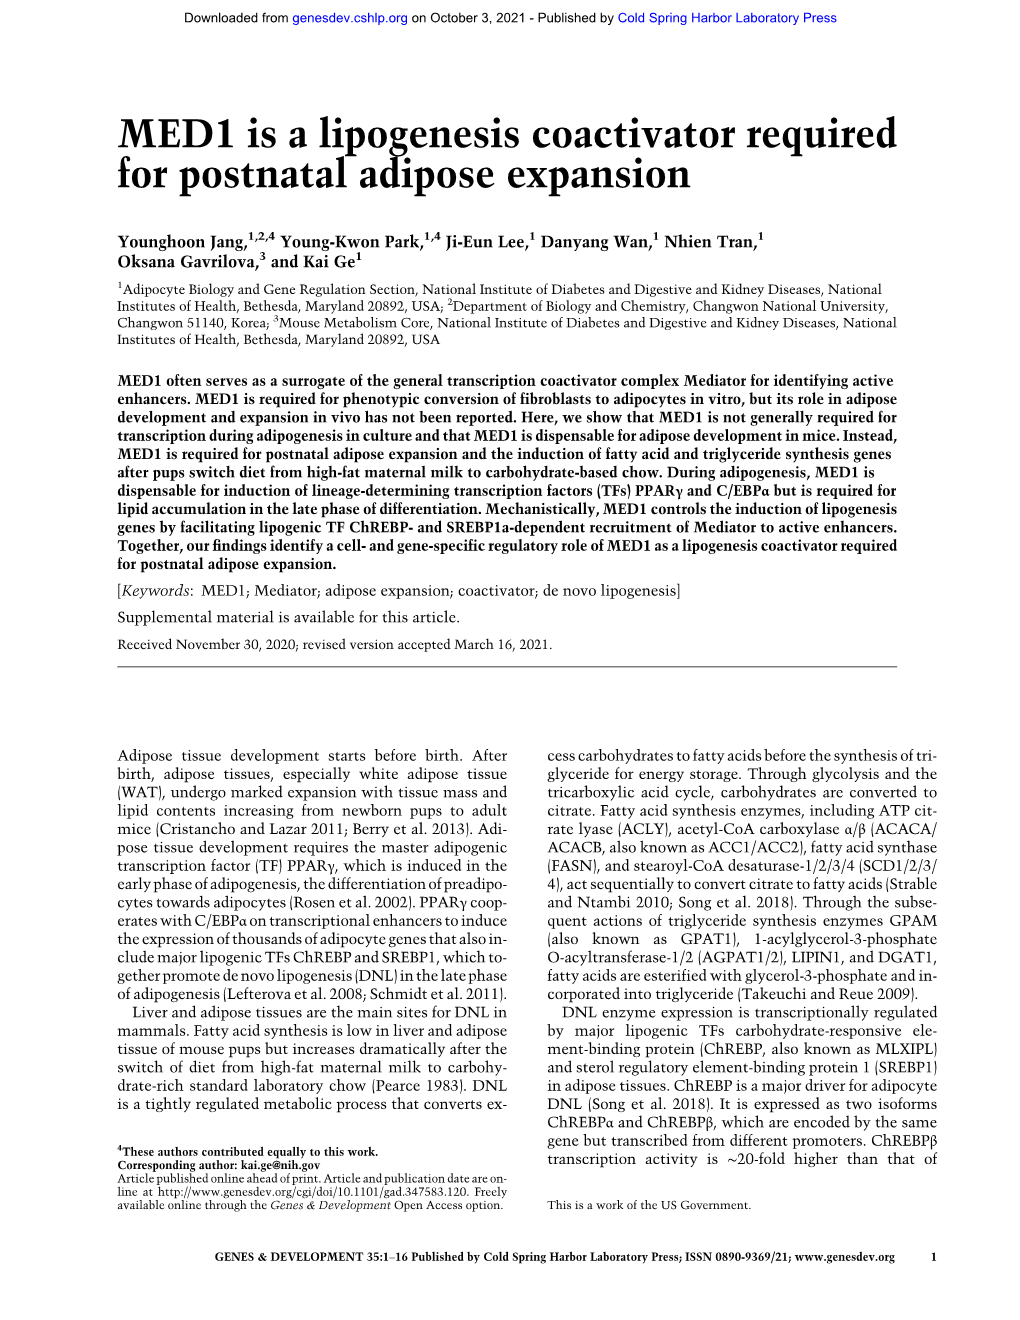 MED1 Is a Lipogenesis Coactivator Required for Postnatal Adipose Expansion